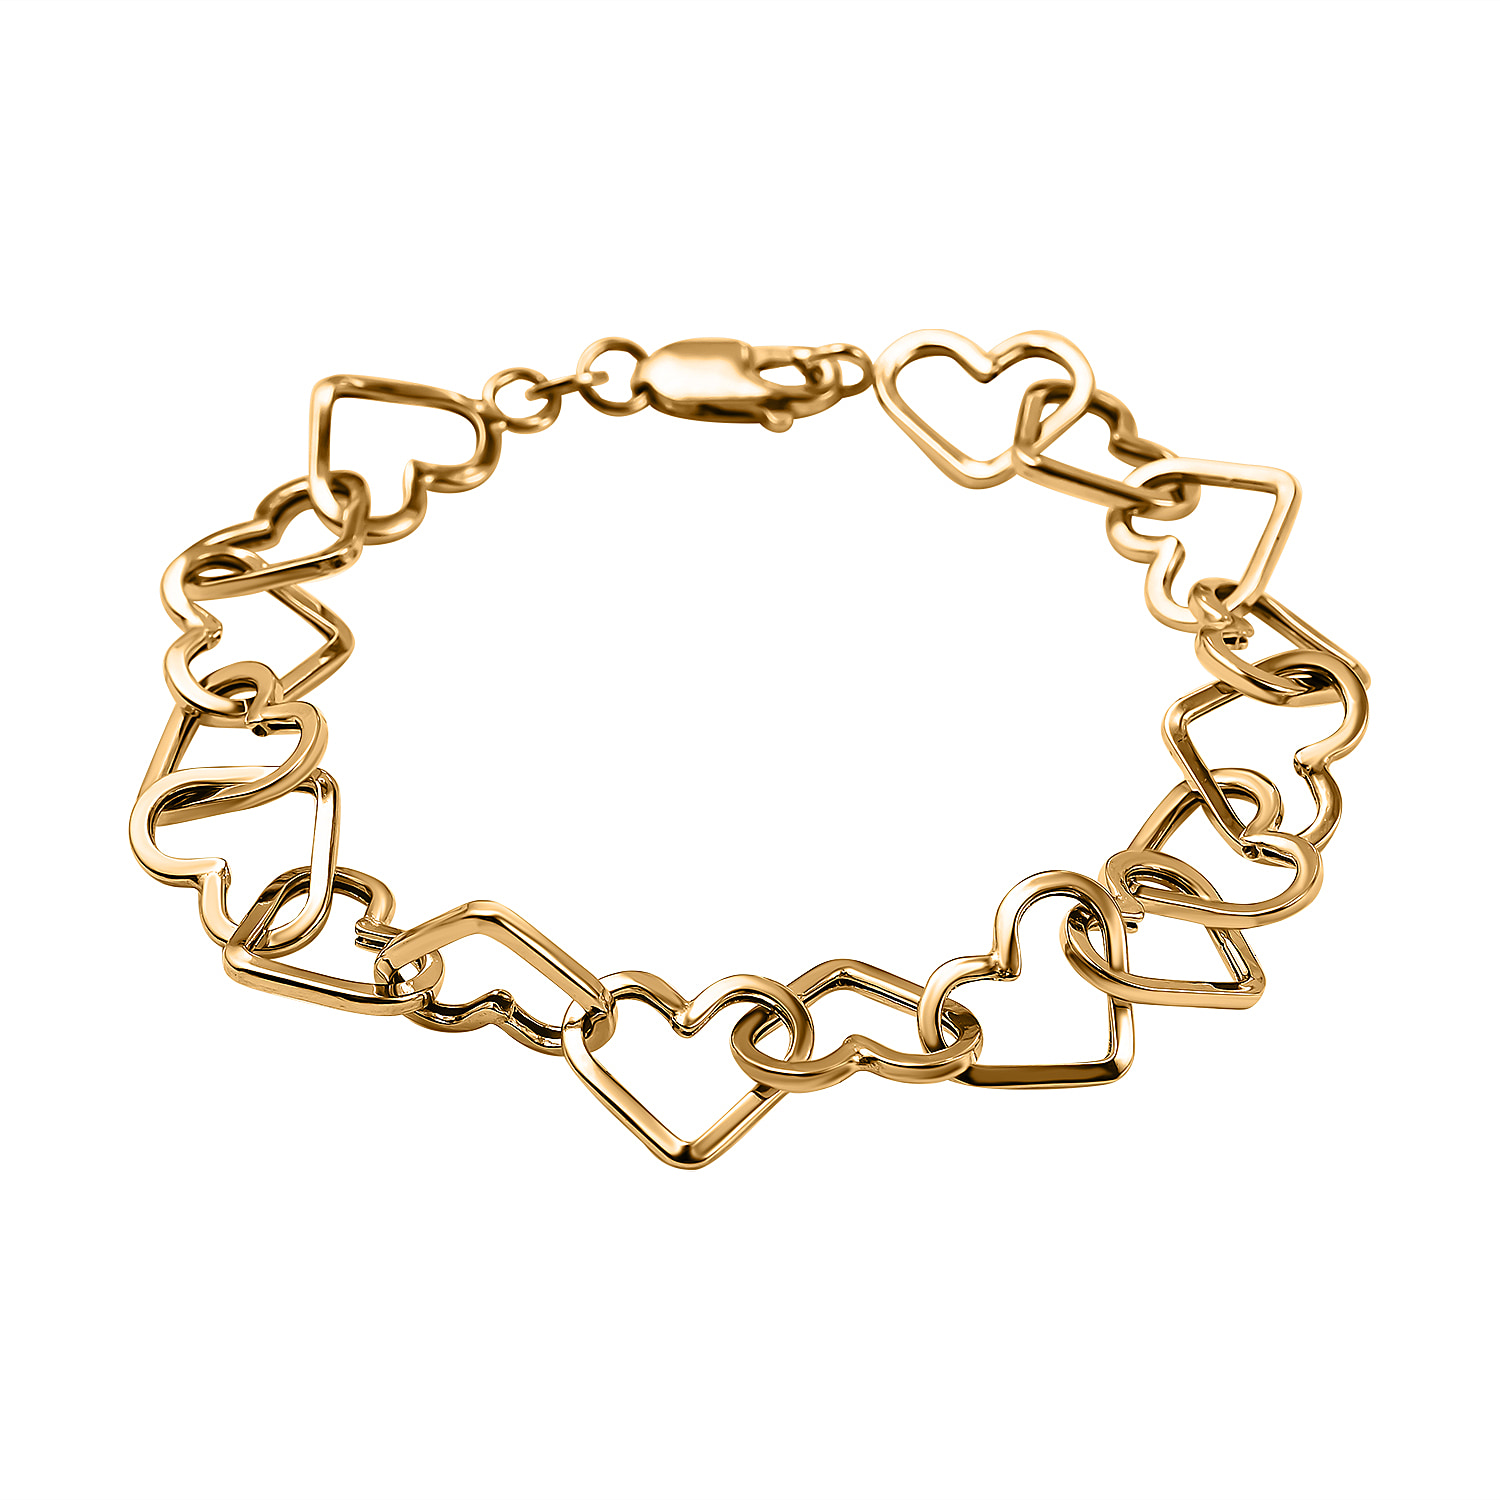 Vicenza Closeout Deal - 9K Yellow Gold Heart Link Bracelet (Size - 7.5)